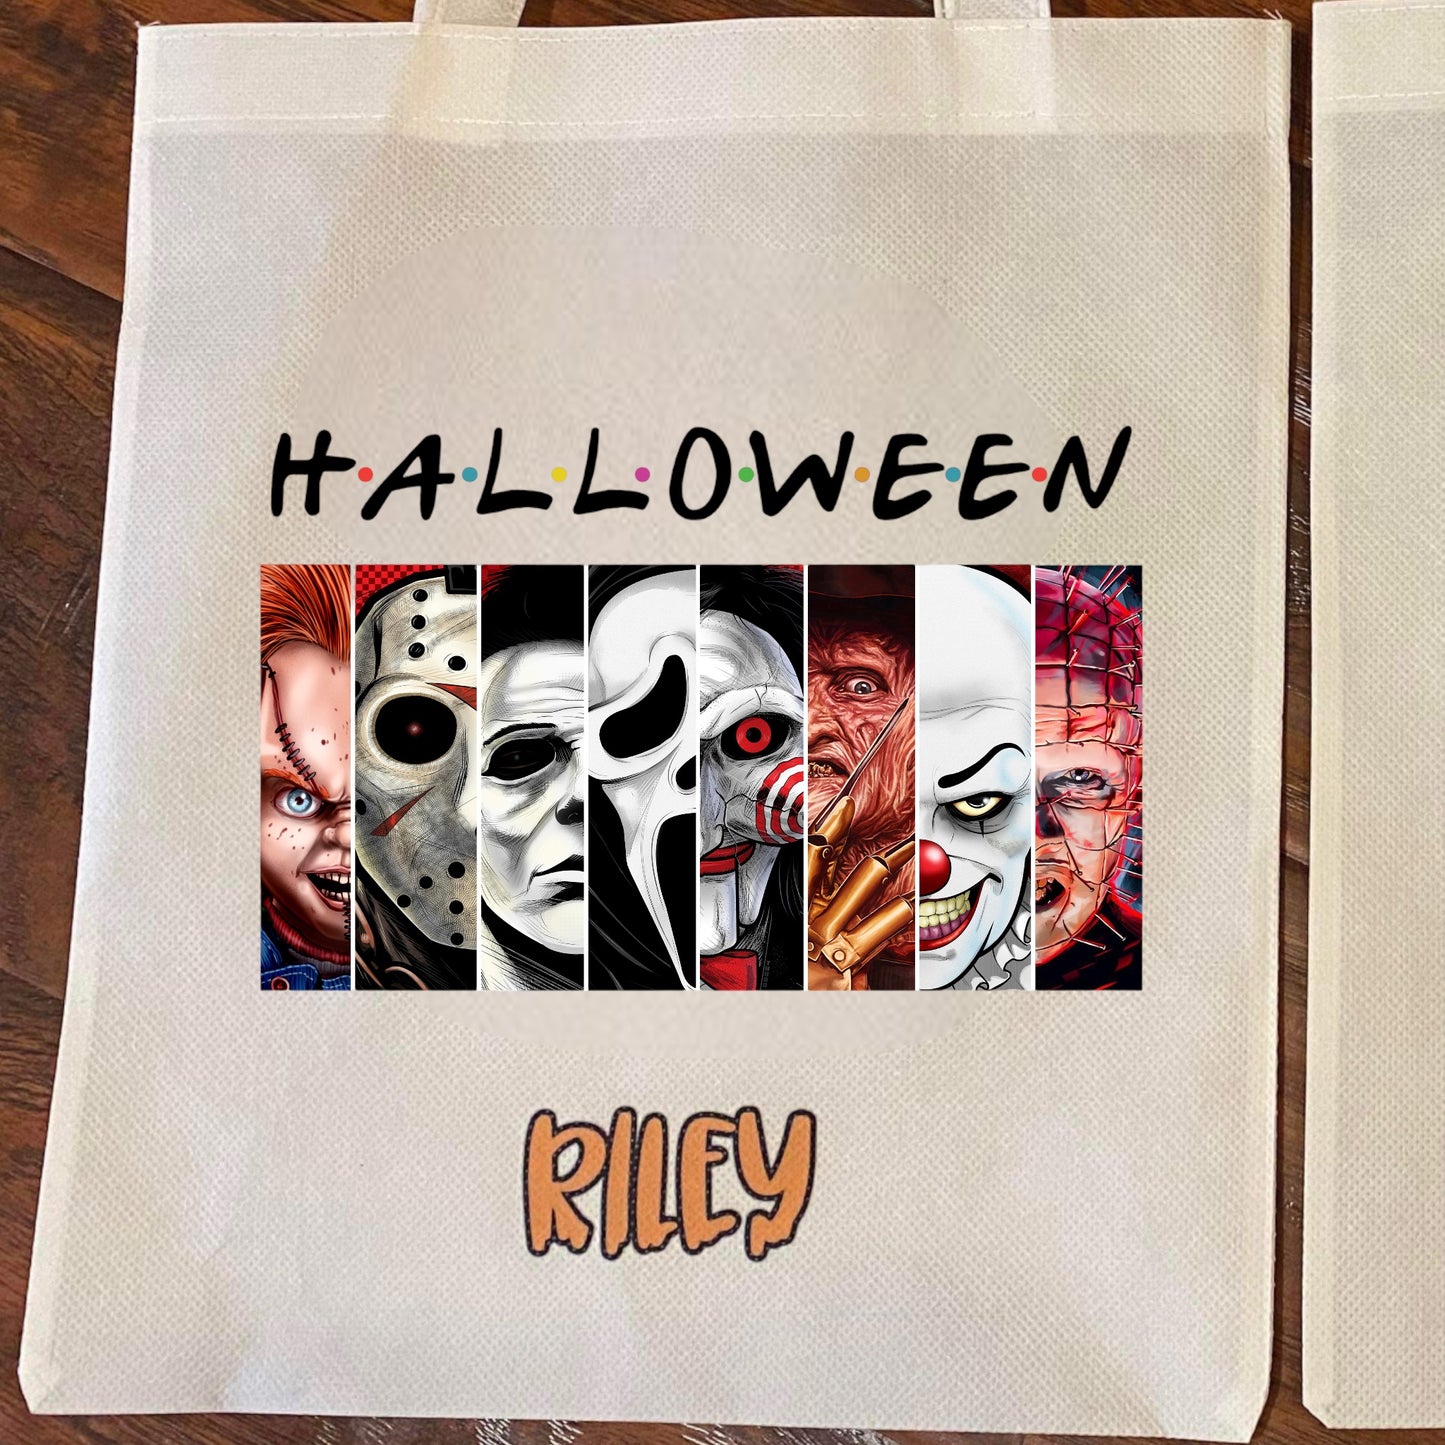 Trick-Or-Treat Bags